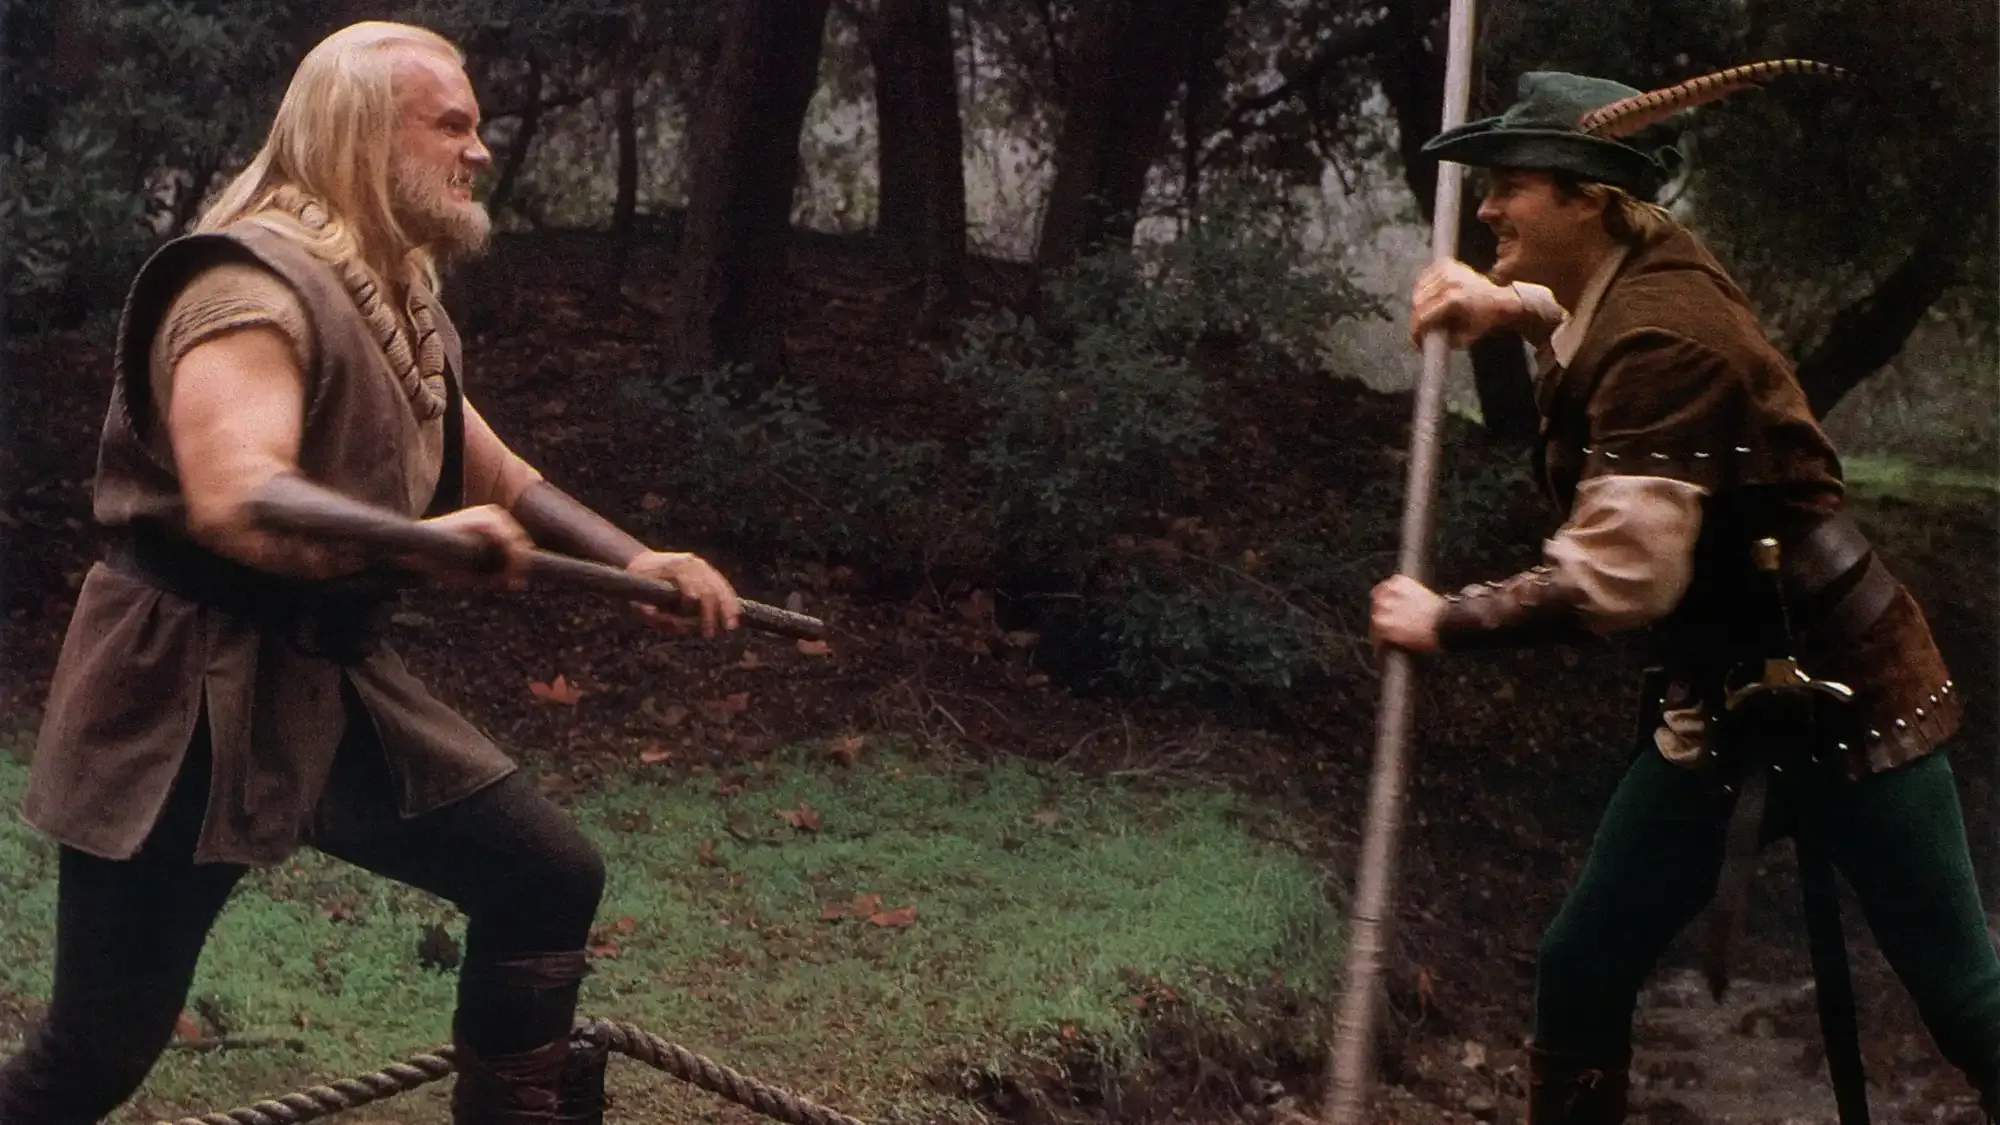 Robin Hood: Men in Tights movie review